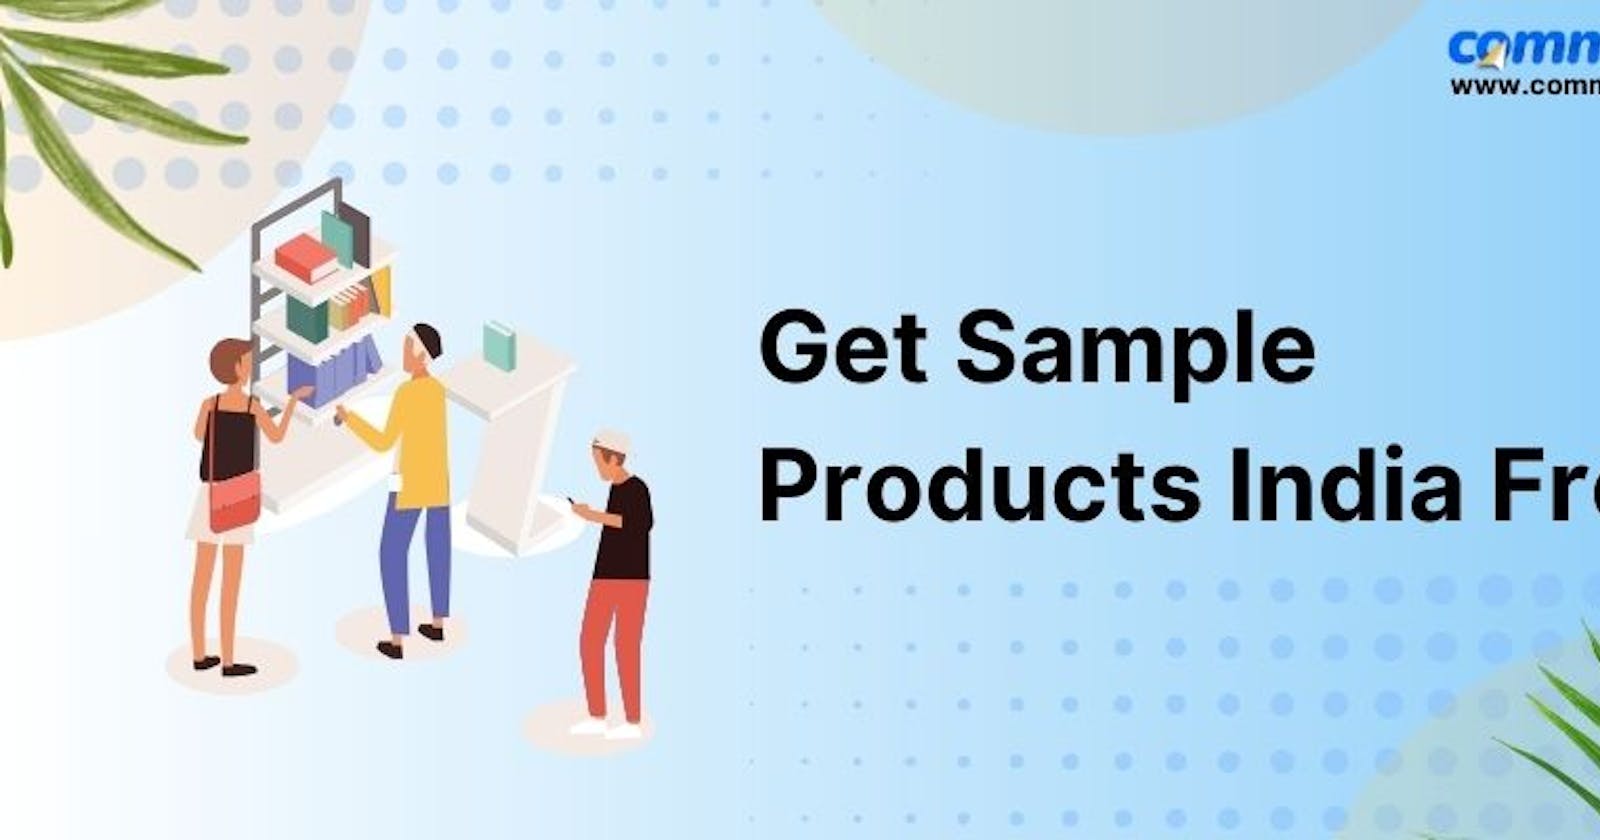 Free Sample Products Today in India: A Guide to Getting the Best Deals